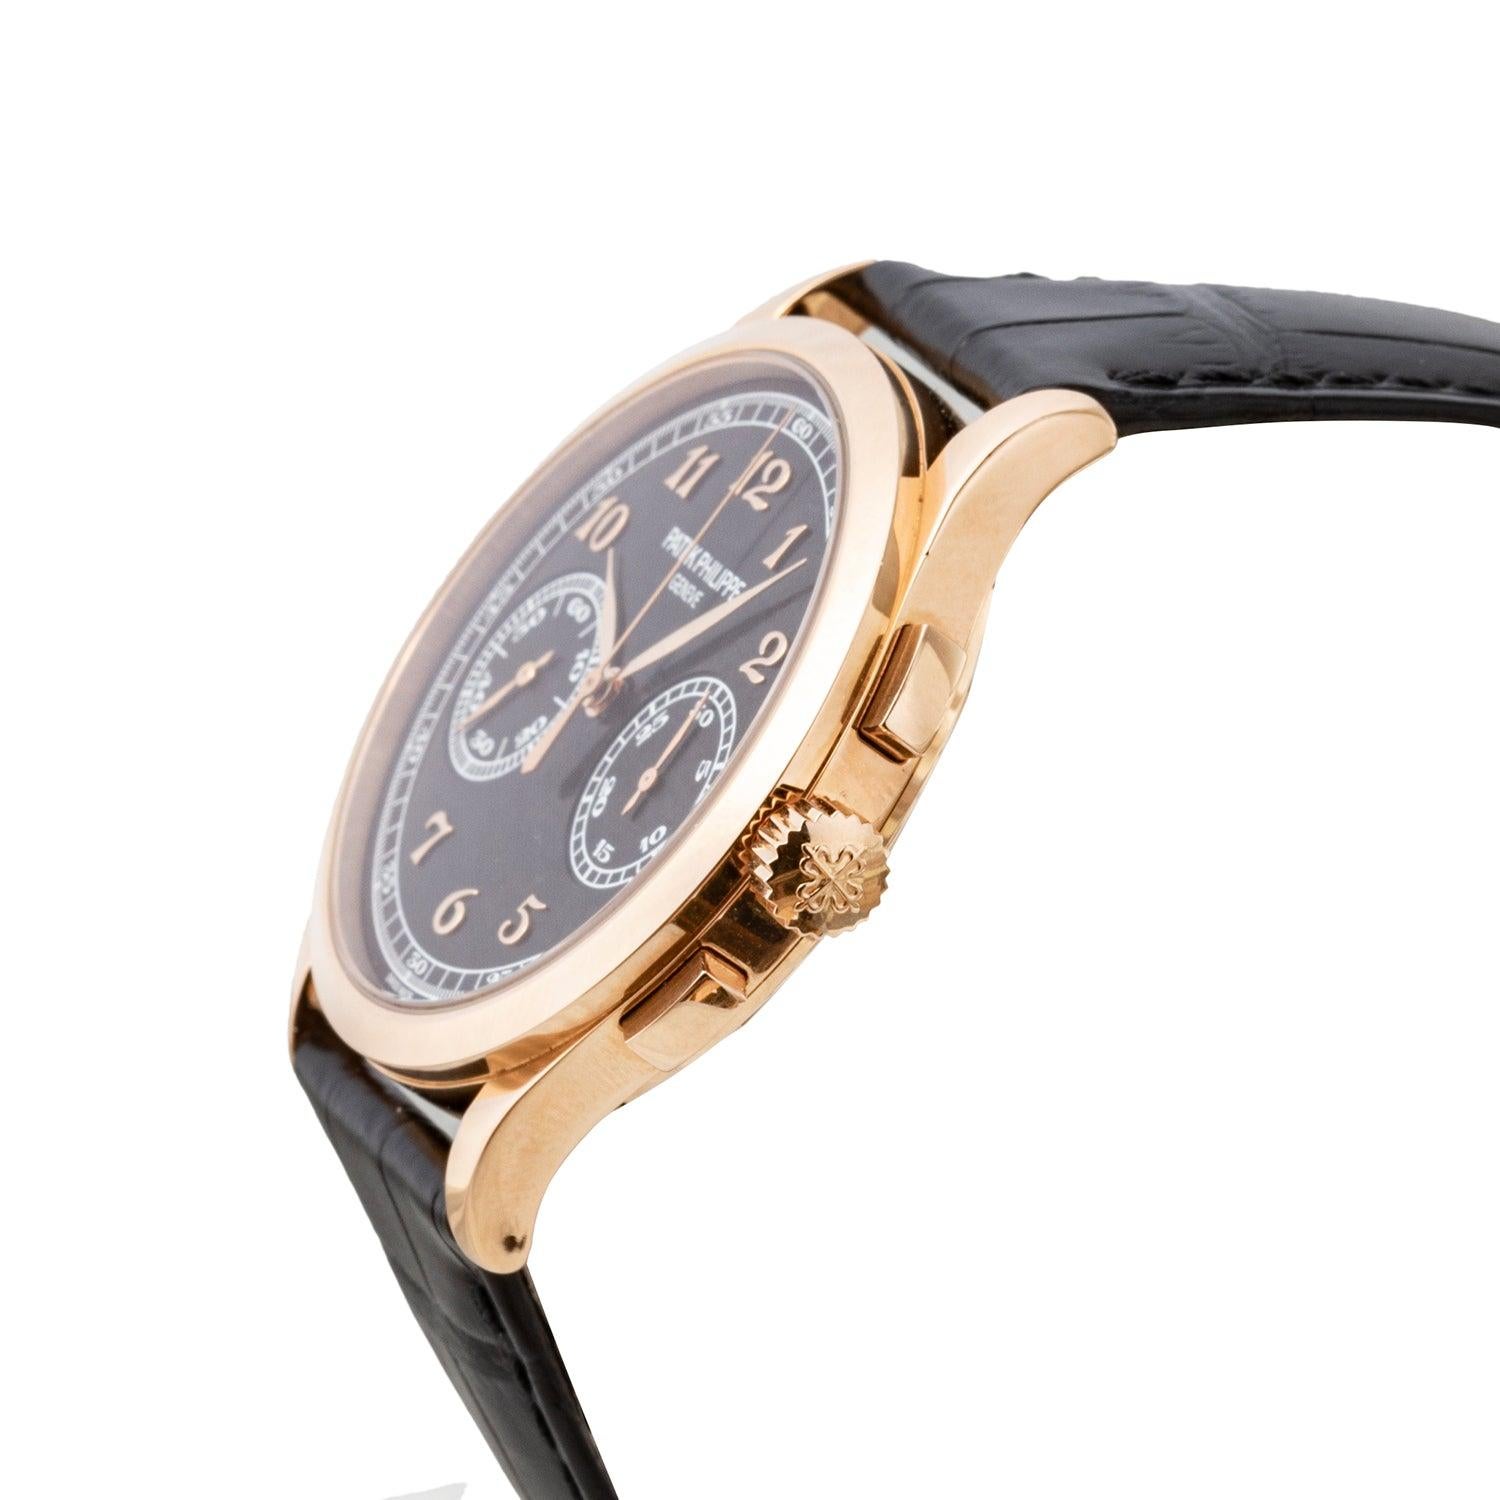 Pre-owned Patek Philippe Chronograph (ref. 5170R-010), featuring the Caliber CH 29-535 PS manual-winding movement with a 65-hour power reserve; black dial with applied gold Breguet-style numerals; small seconds subdial; 30-minute chronograph